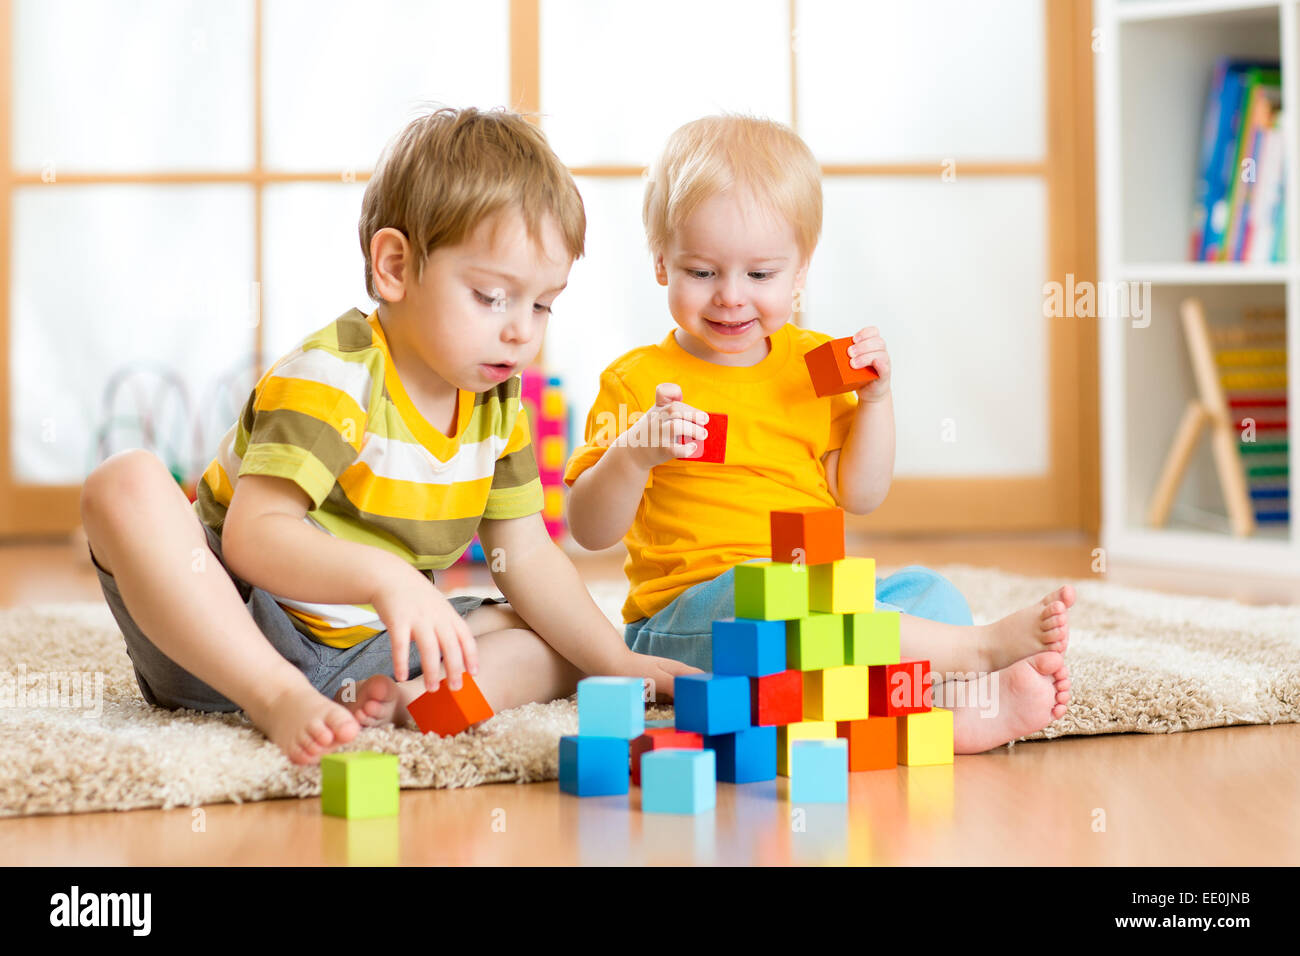 Kids playing in the room Stock Photo